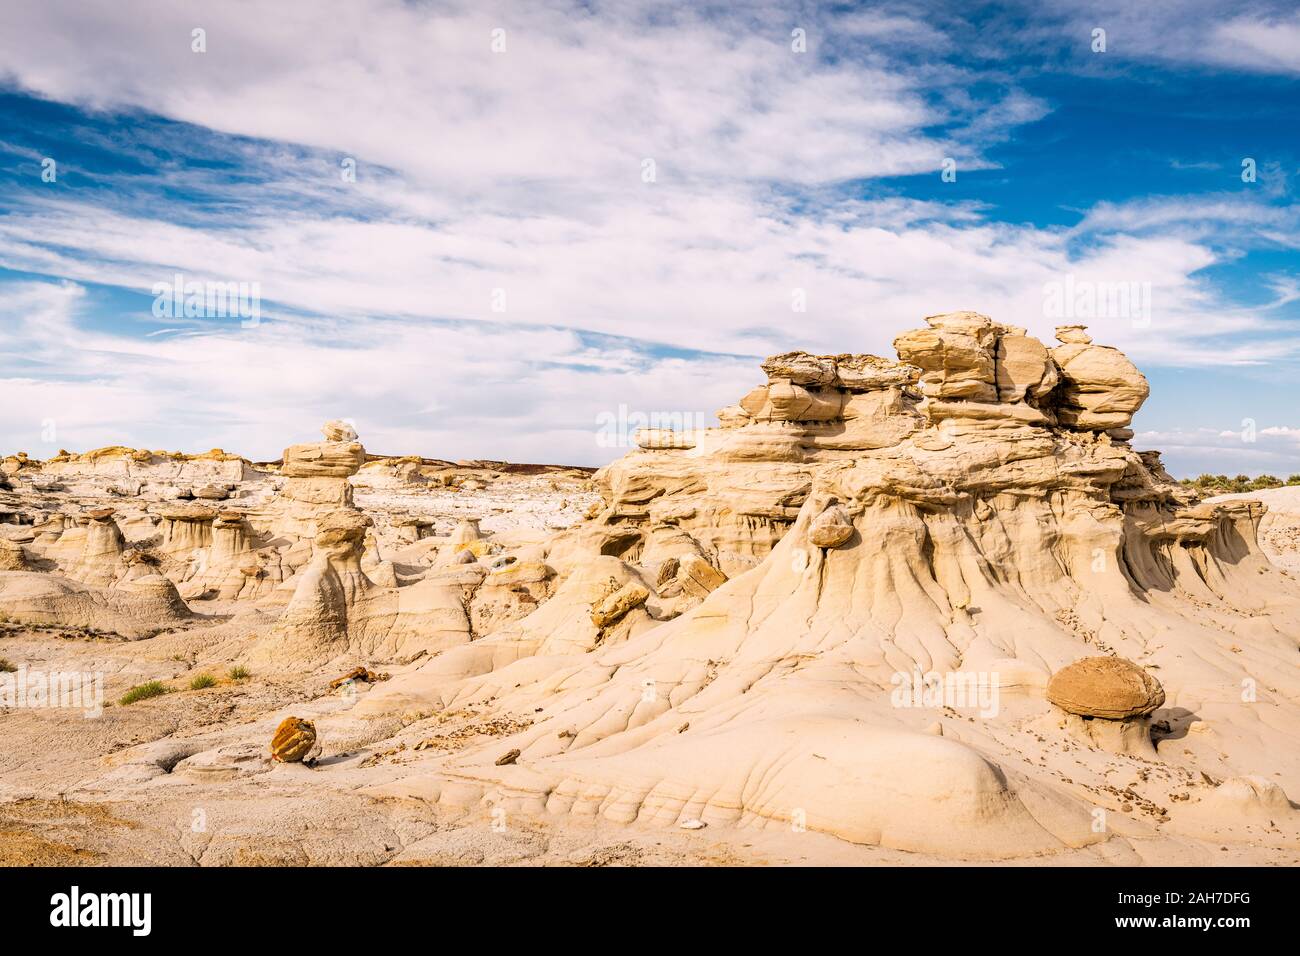 Bisti Badlands, New Mexico, USA hoodoo formations rocheuses. Banque D'Images